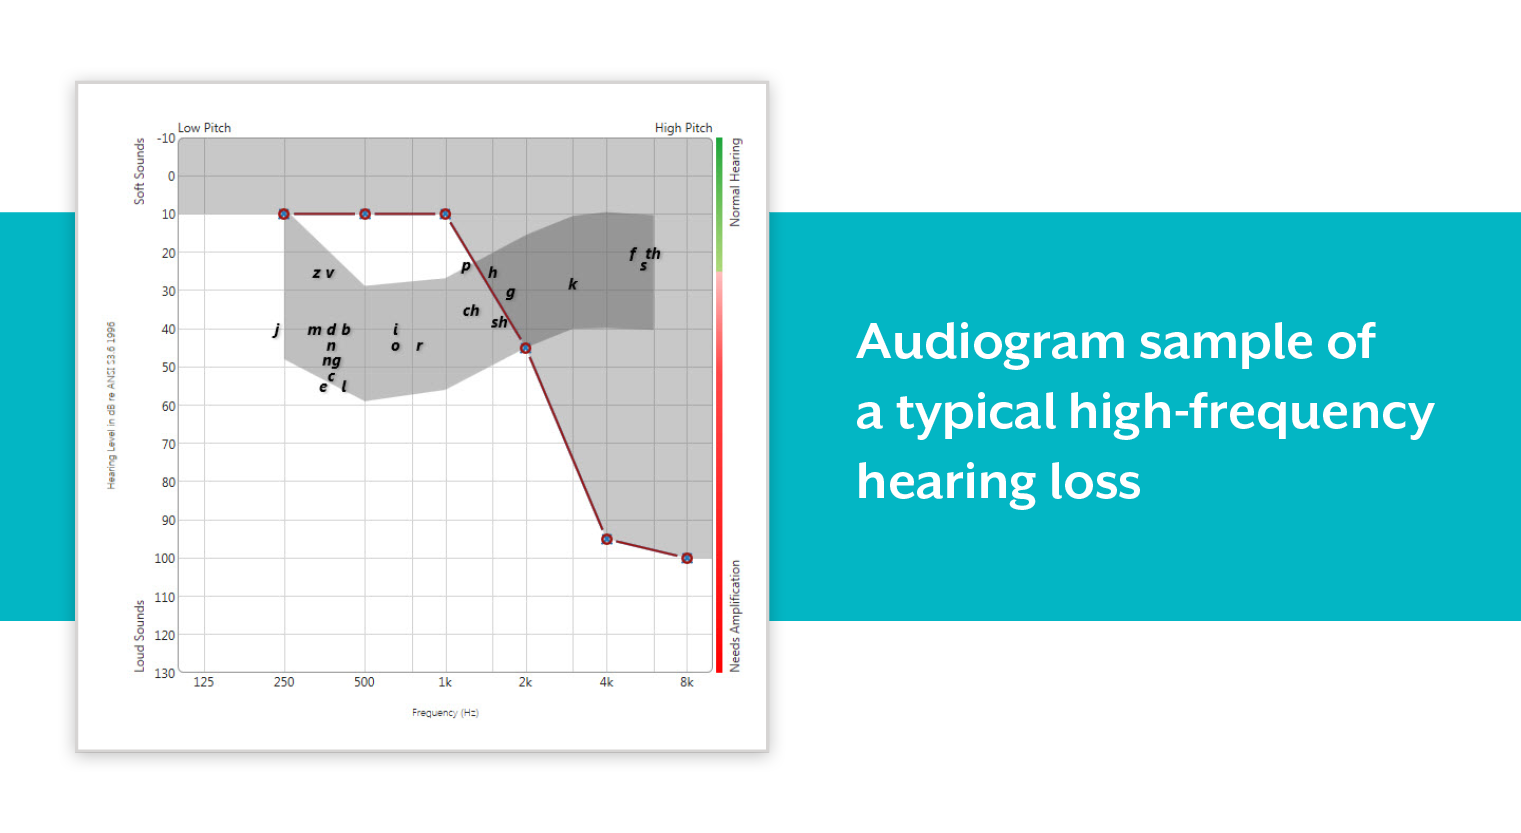 High-Frequency hearing loss audiogram sample.